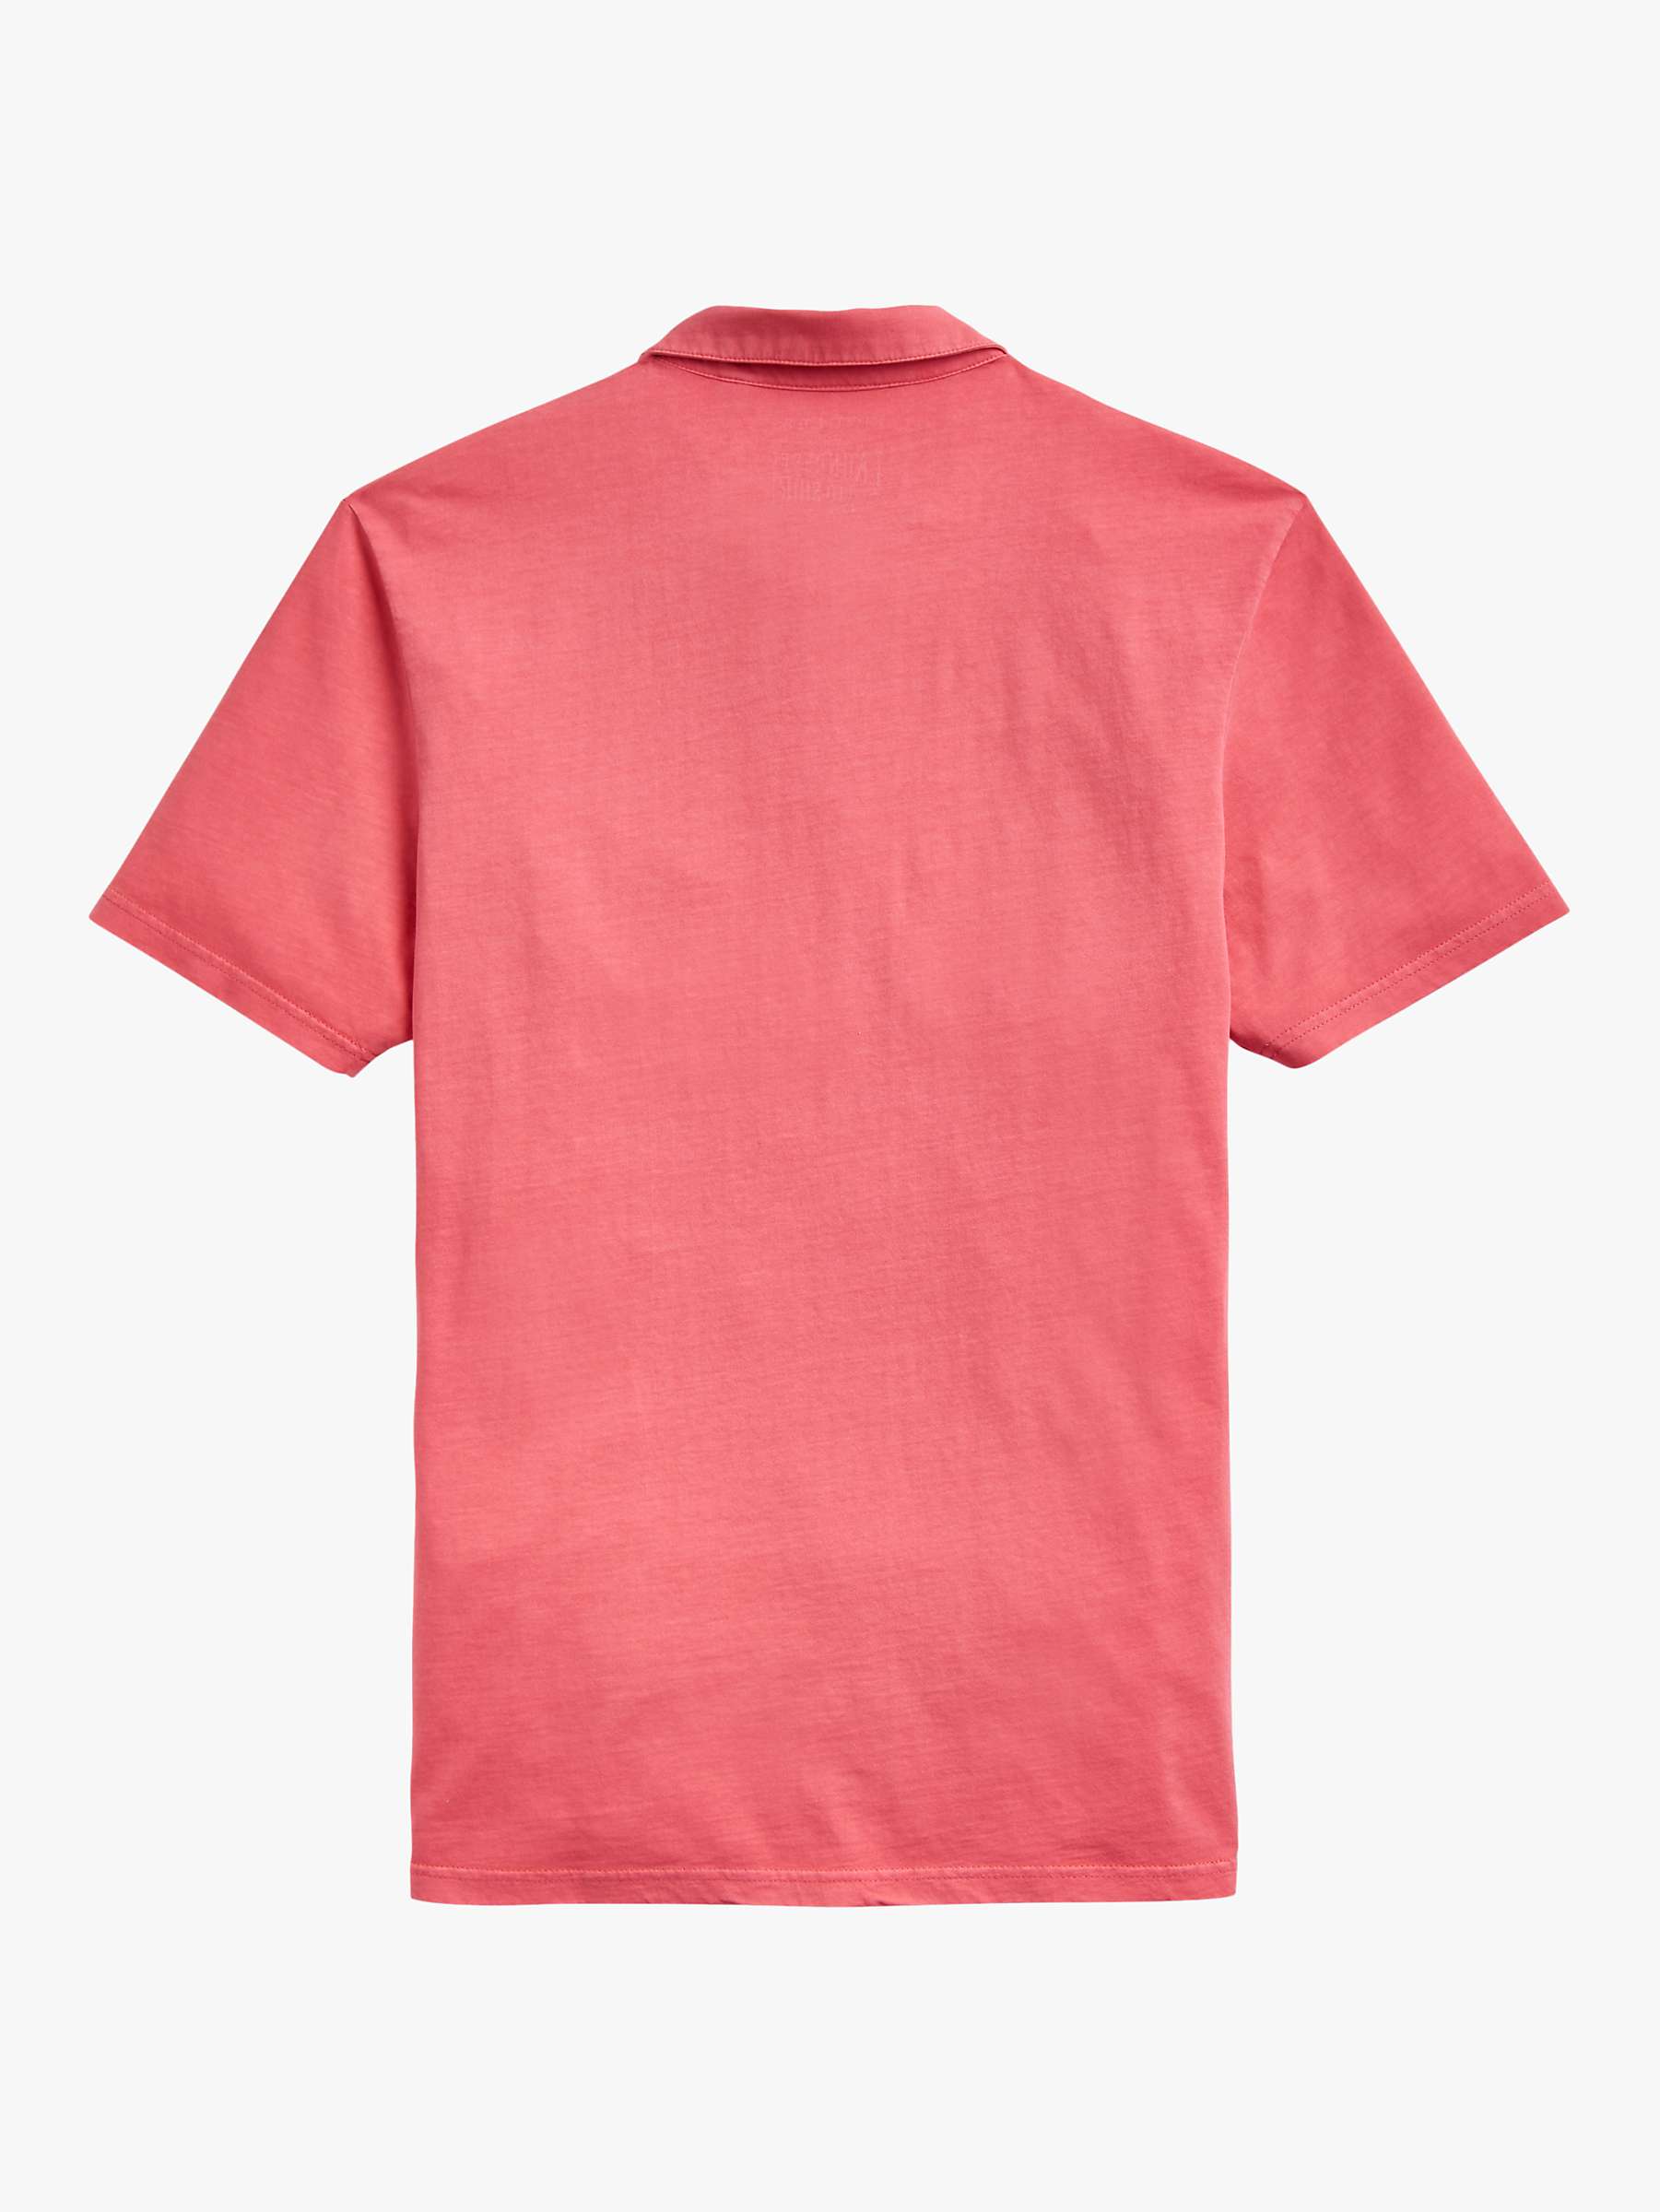 Buy Joules Laundered Polo Shirt Online at johnlewis.com